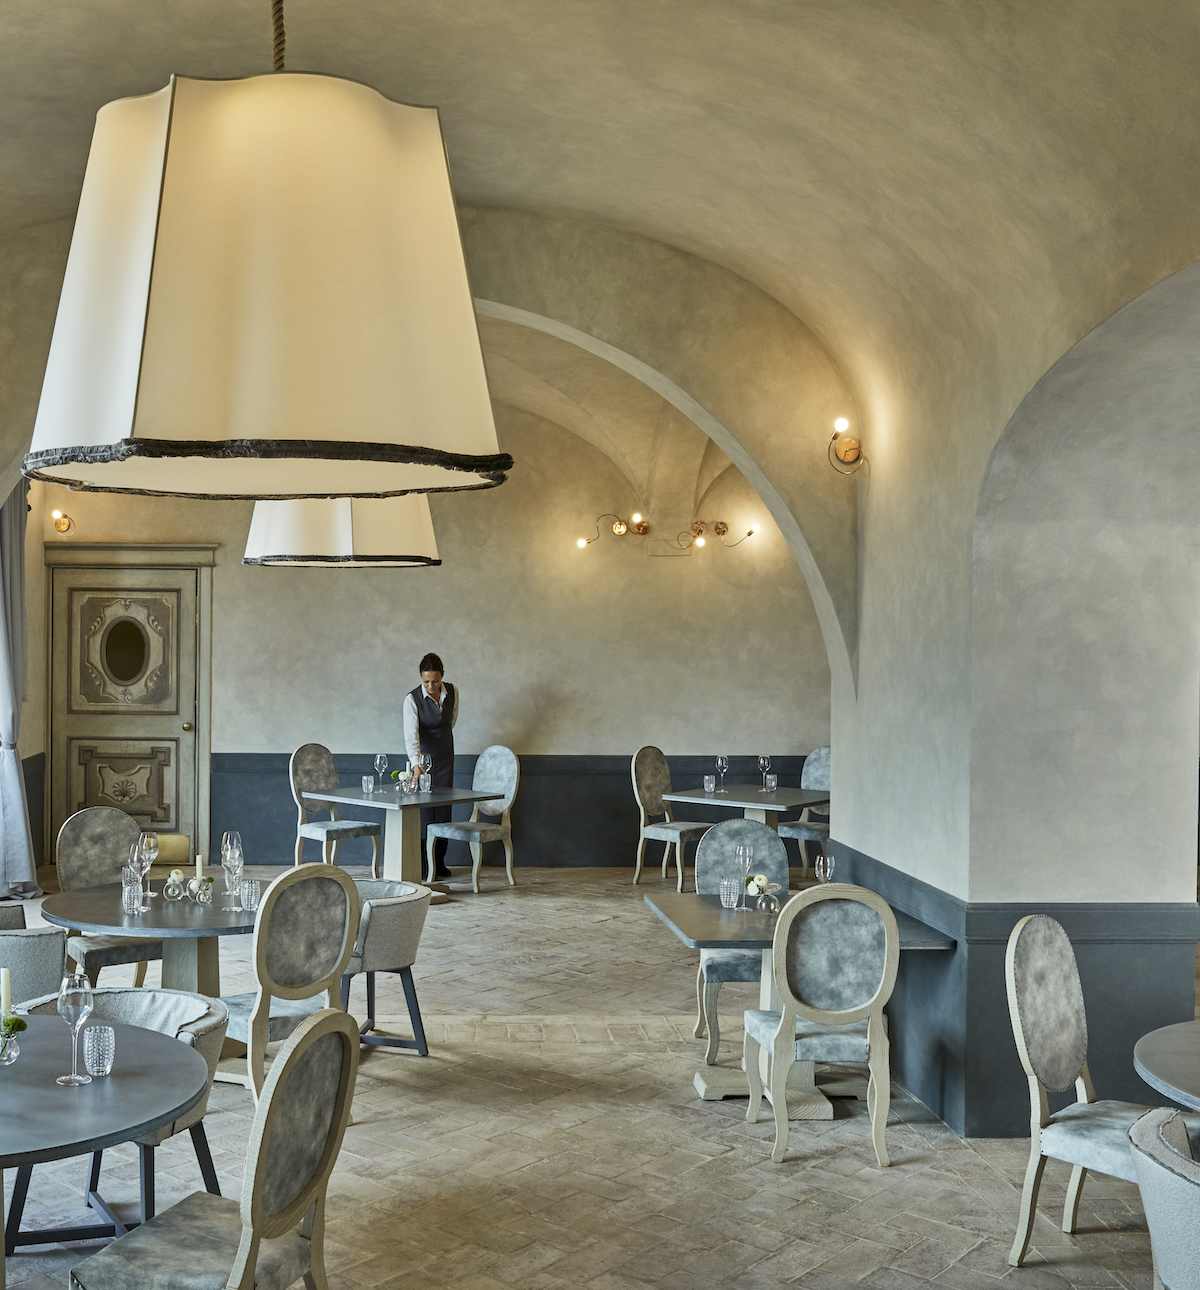 La Torre features lampshade-like chandeliers and an earthy design